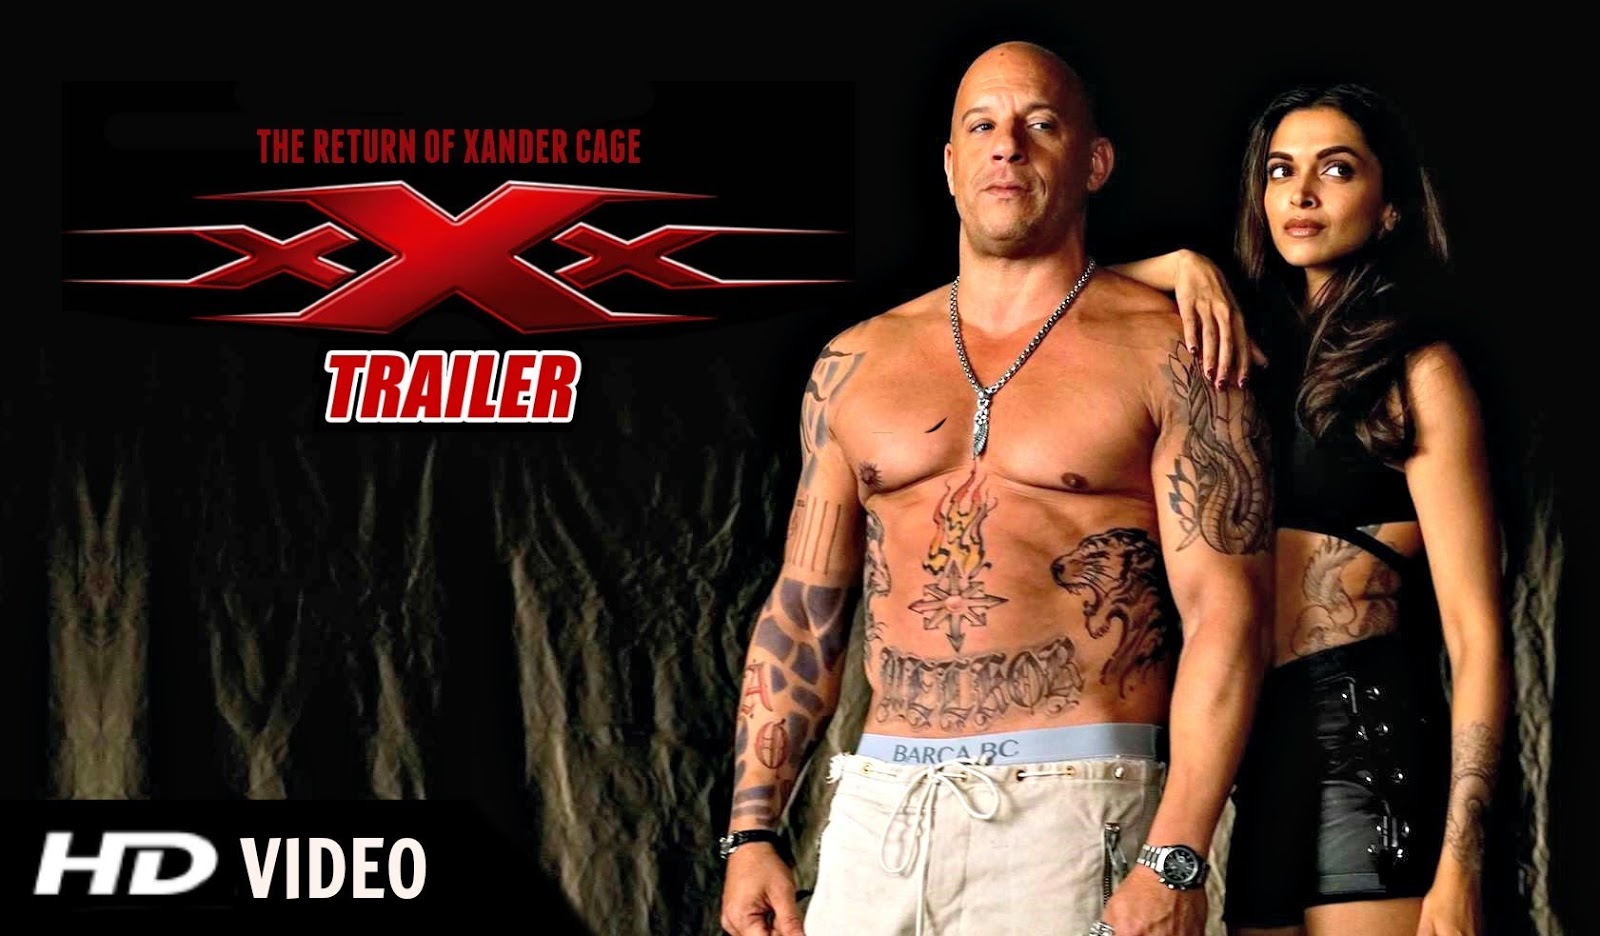 xXx – The Return of Xander Cage 2017 HD Official Trailer 720p